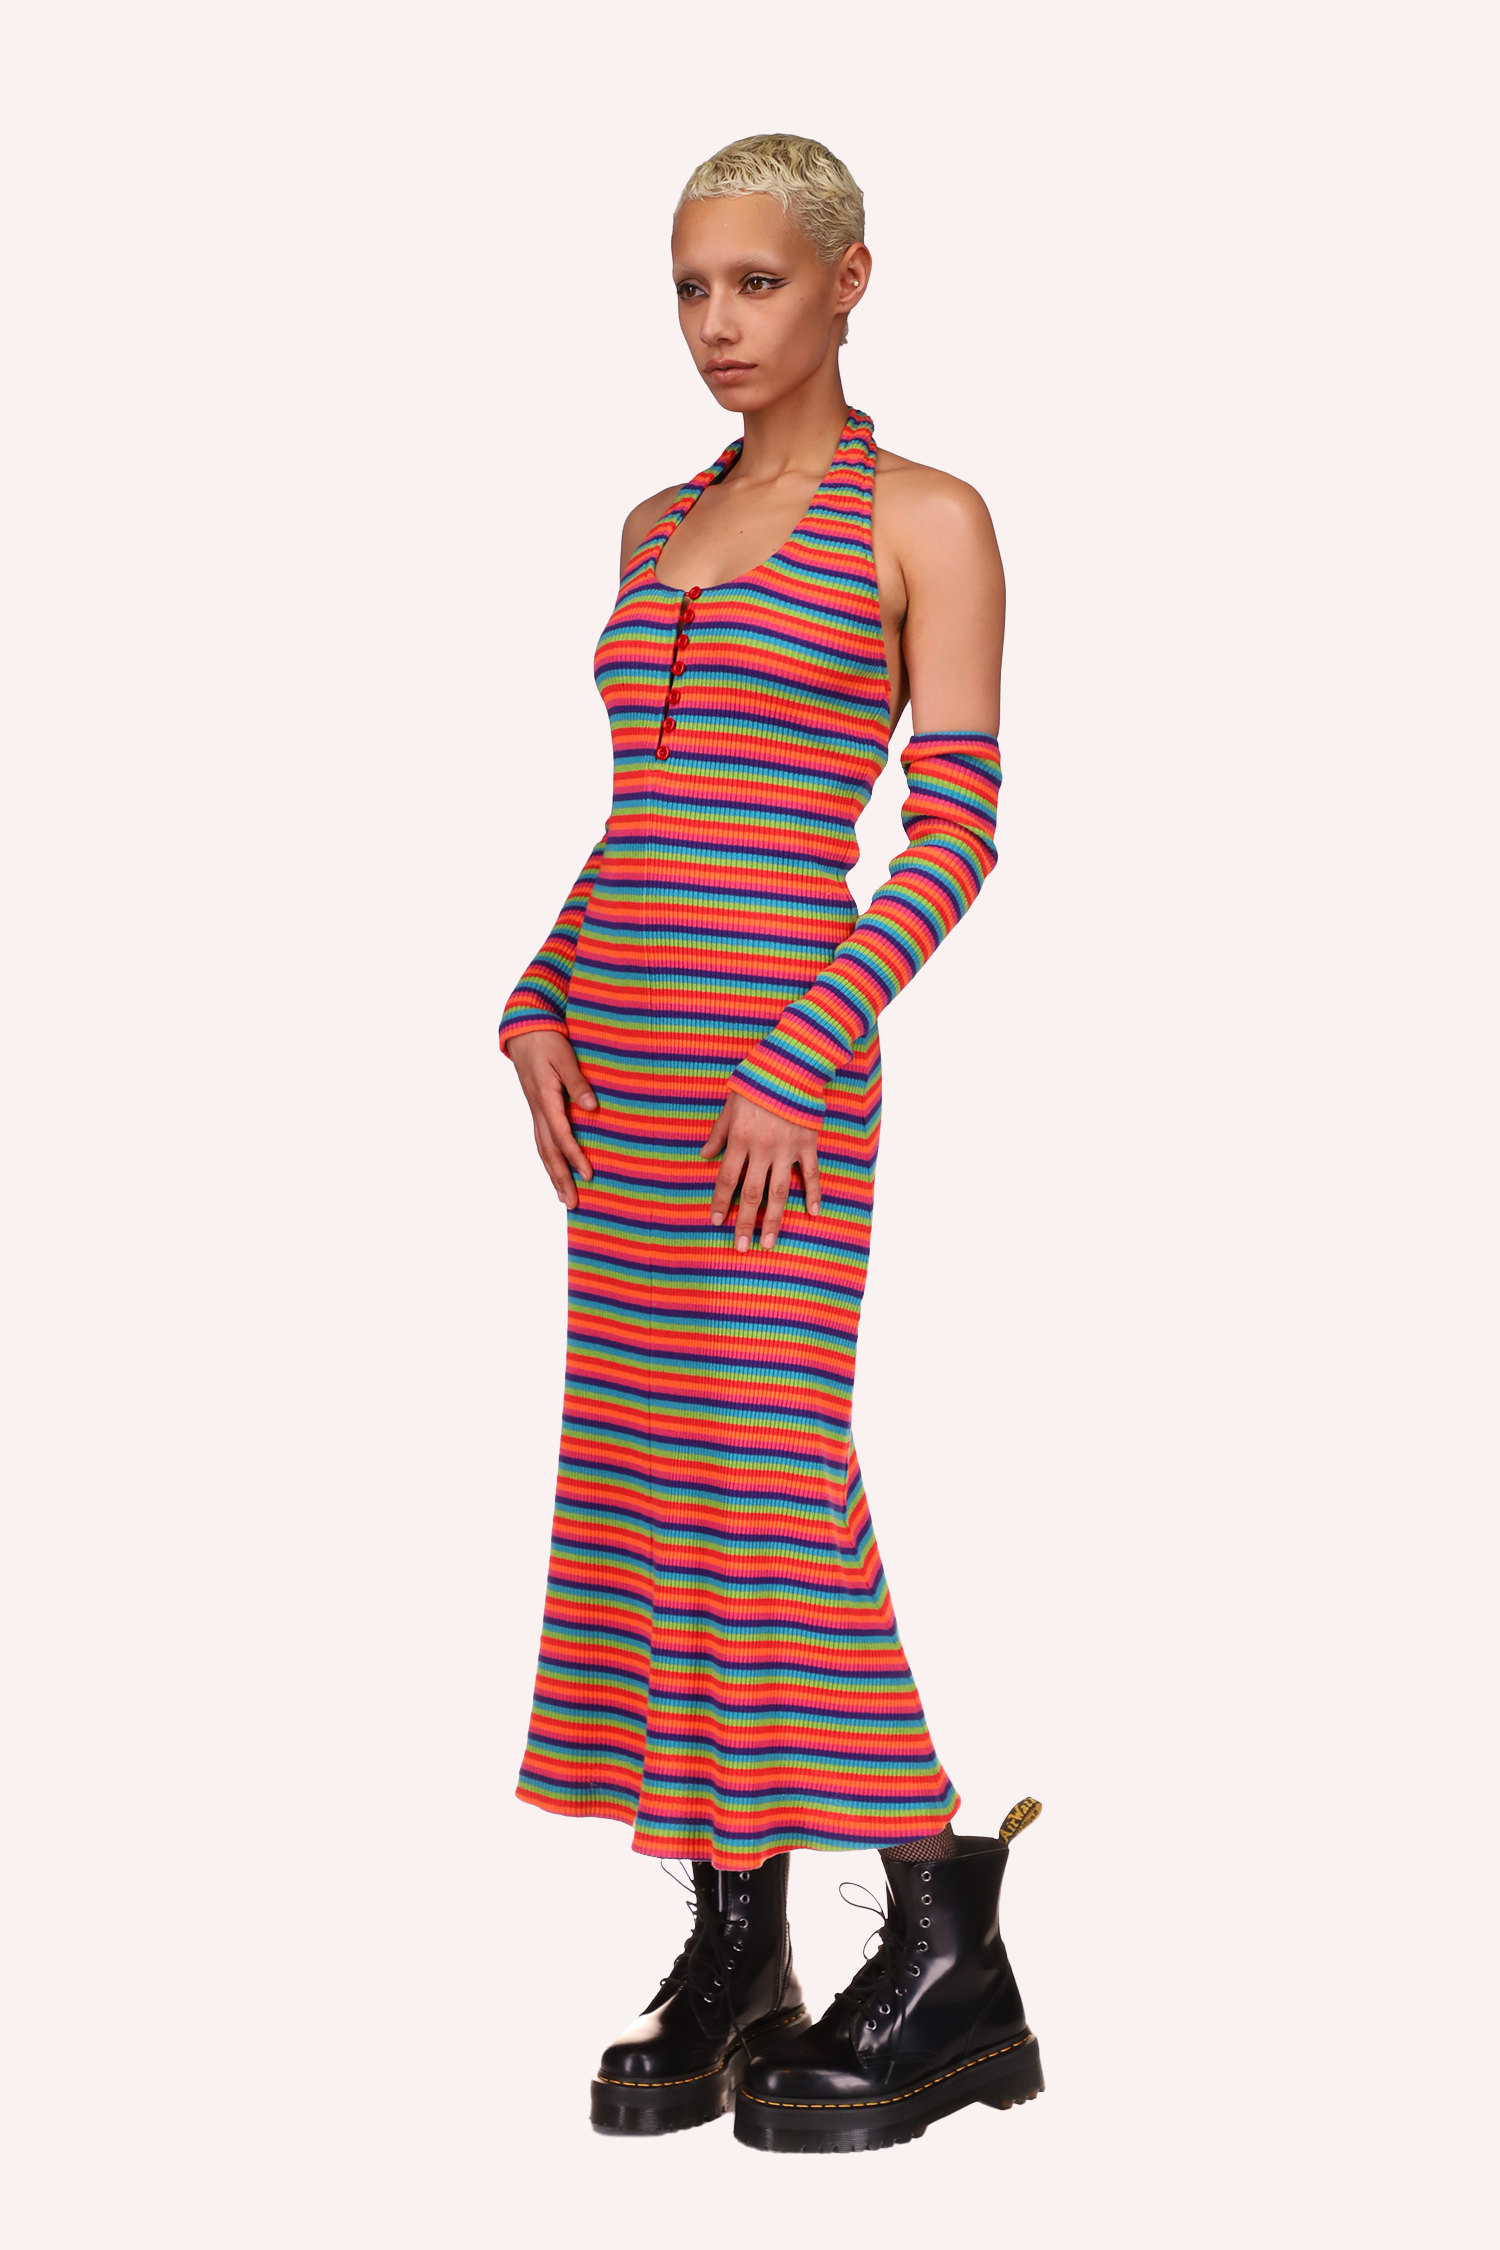 Design of horizontal orange, light green, and blue stripes around the body that make you look slim and slender. 